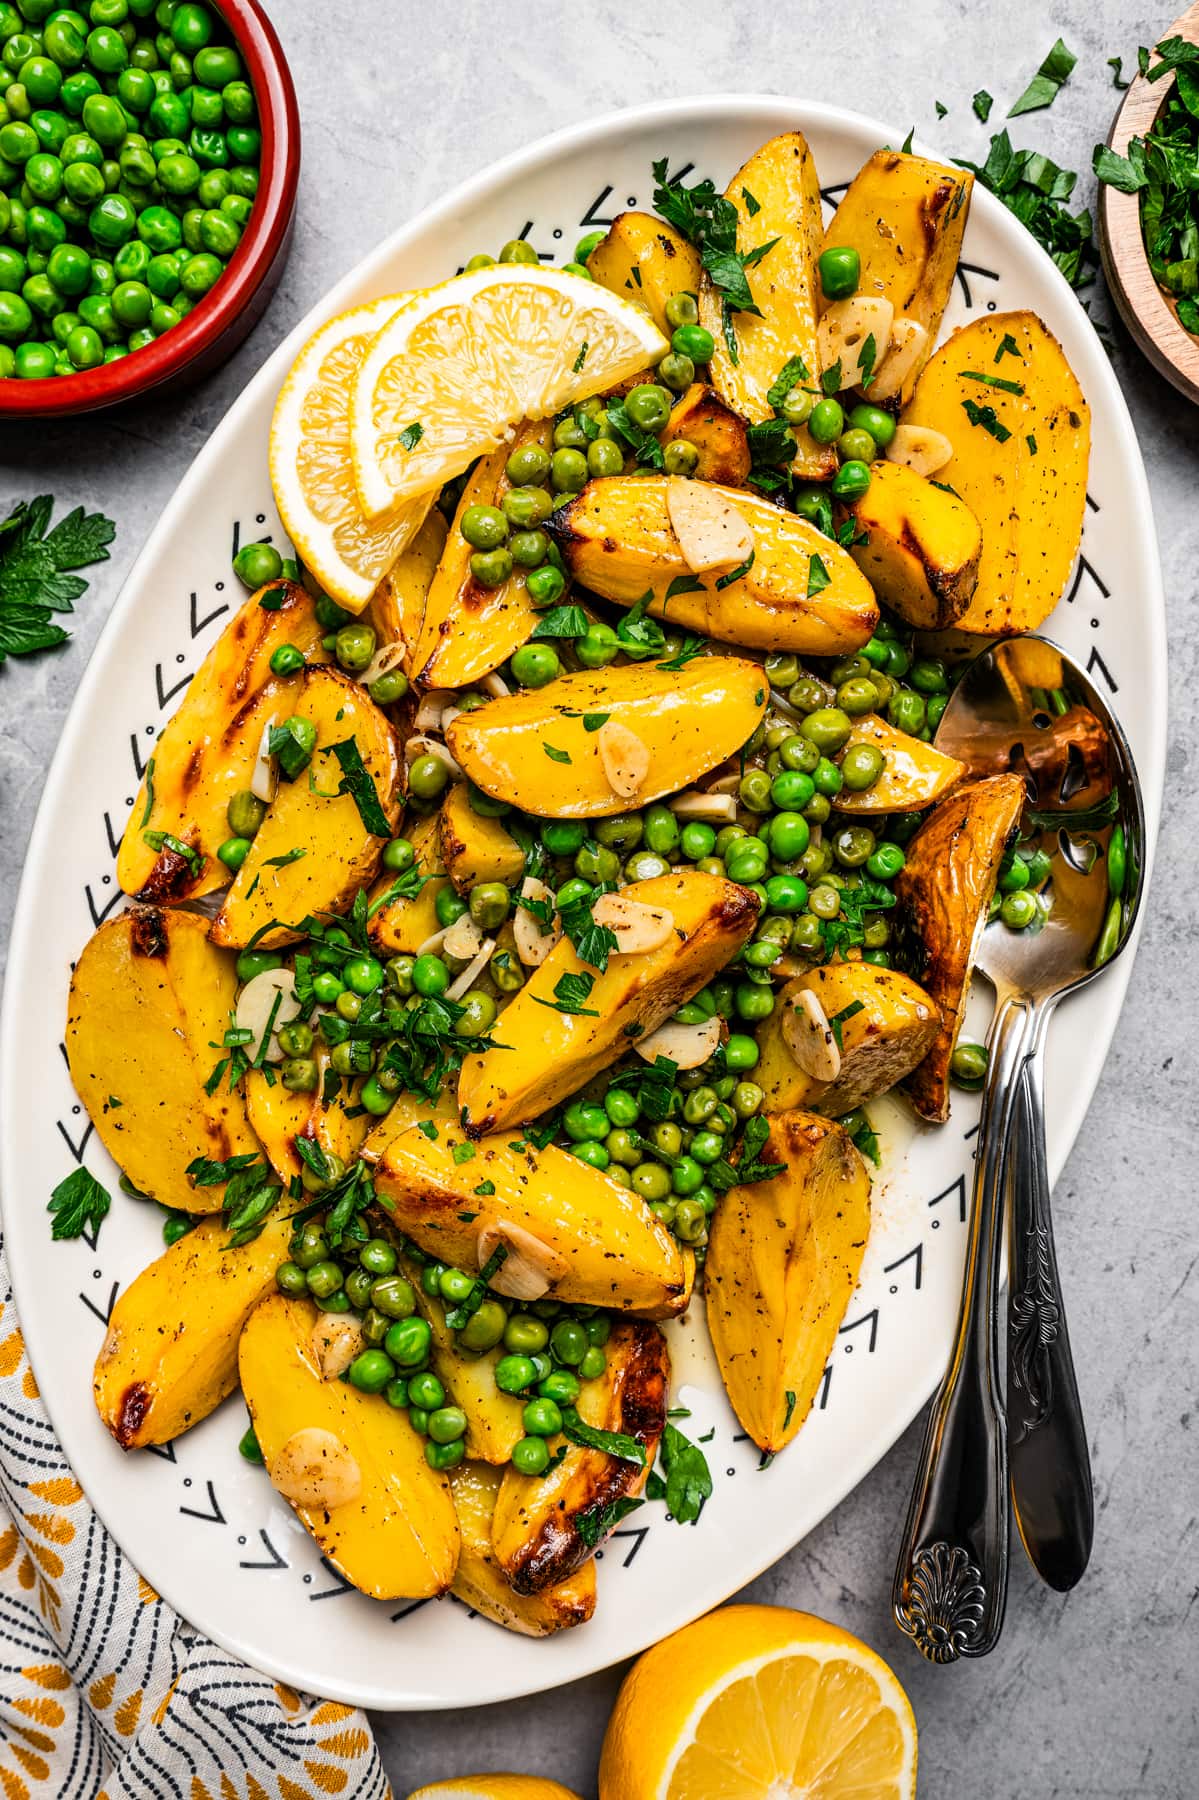 Overhead image of Vesuvio potatoes on a serving platter with lemon slices and serving spoons.